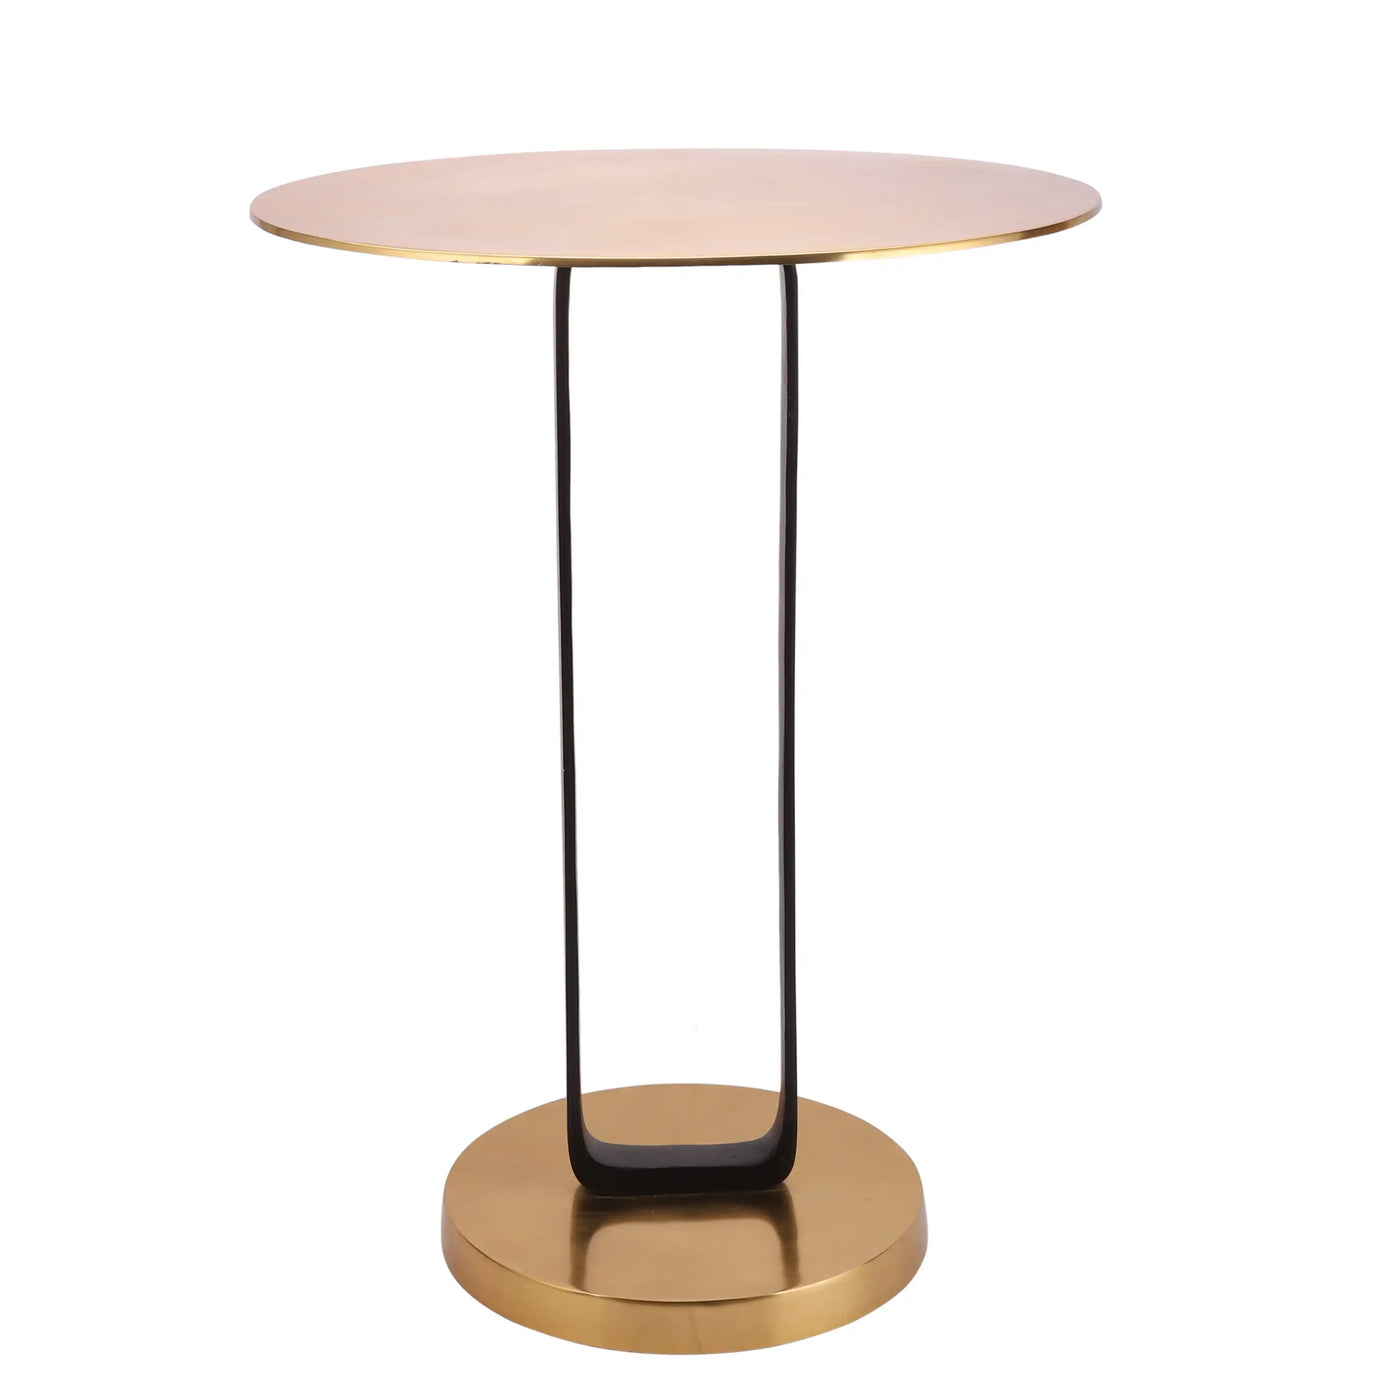 Irwin's Rectangle Table Gold top & base with Black Body 53-182-58-2